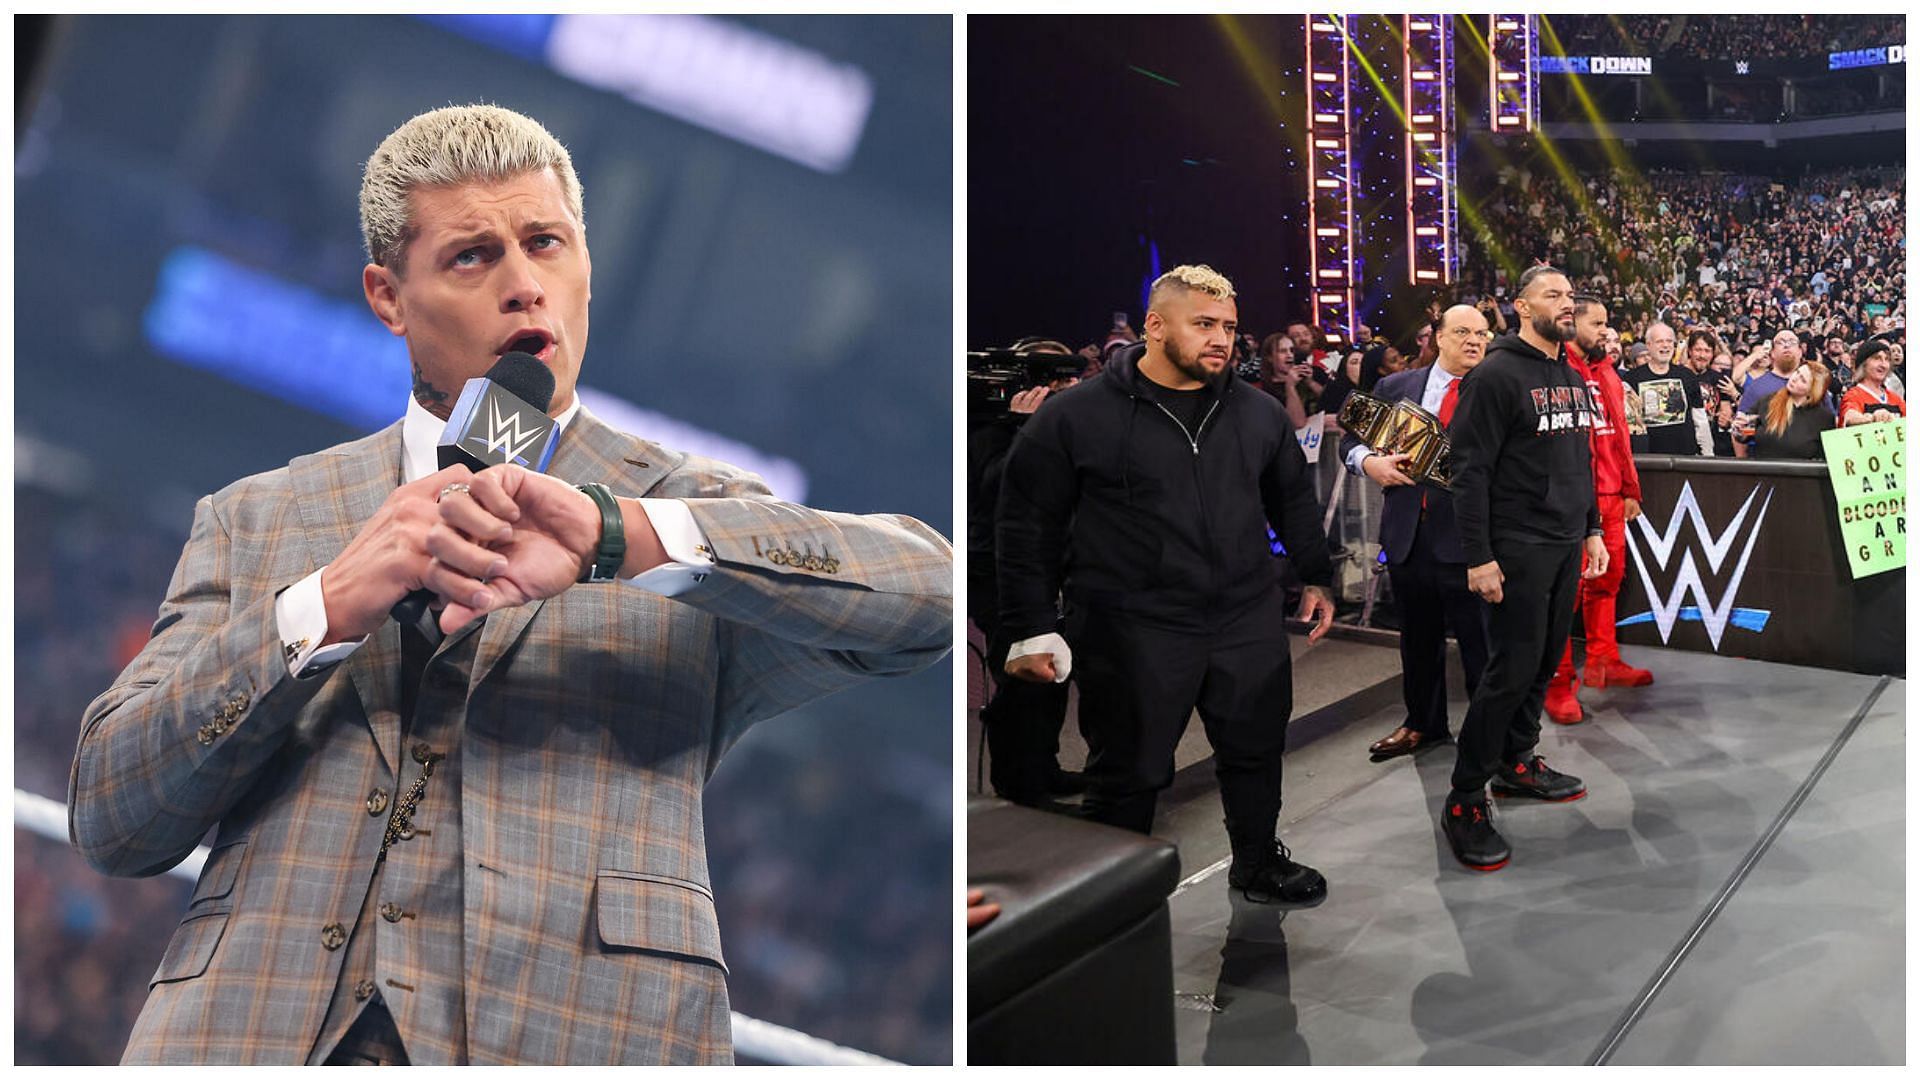 Cody Rhodes (left) and The Bloodline (right).